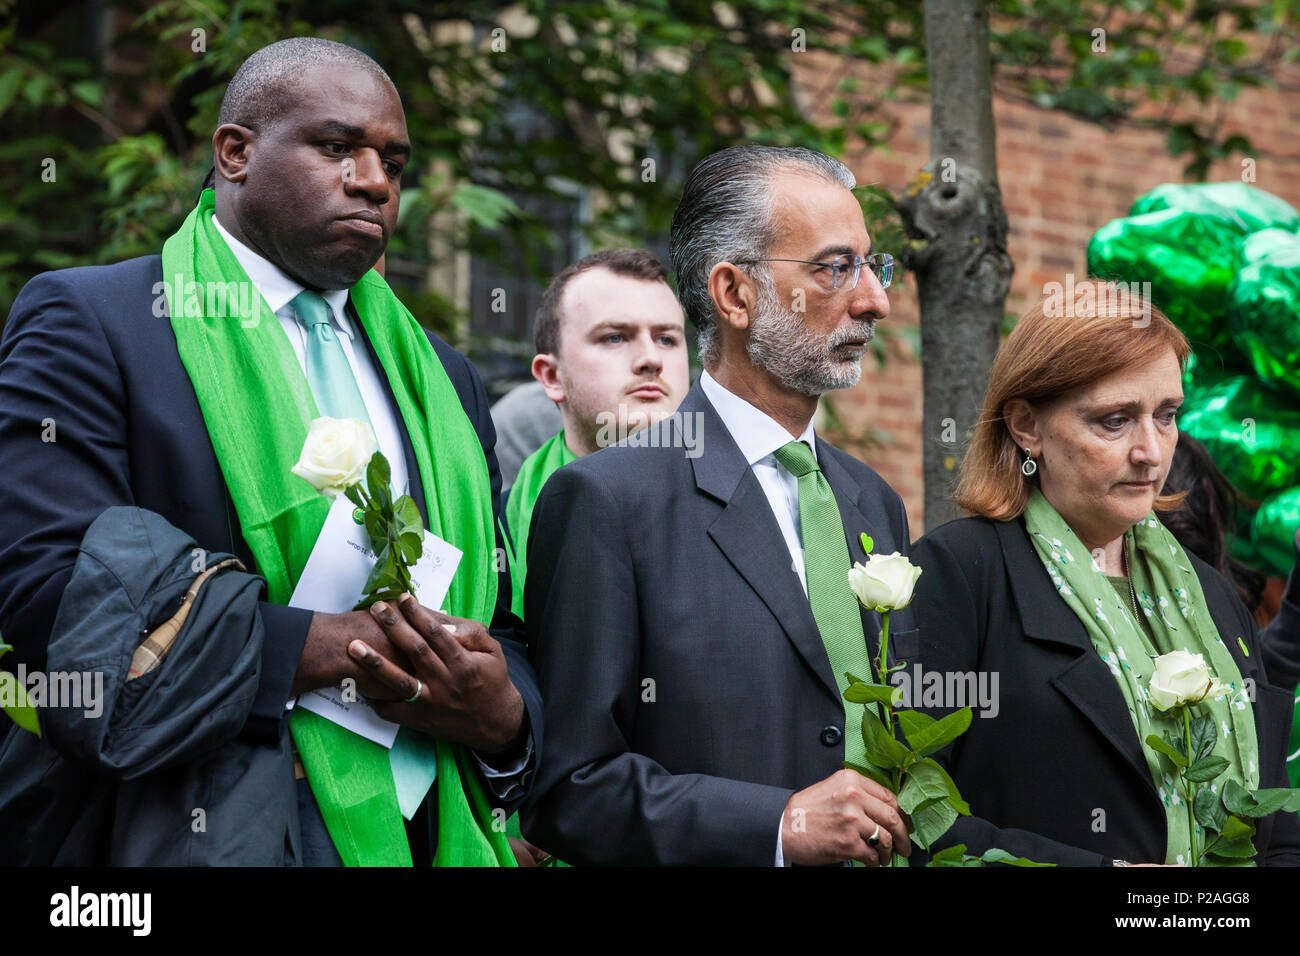 London, UK. 14th June, 2018. Faith leaders and politicians, including David Lammy MP (l) and Emma Dent Coad MP (r), hold flowers outside St Helen's Church before doves are released to mark the first anniversary of the Grenfell Tower Fire. Stock Photo